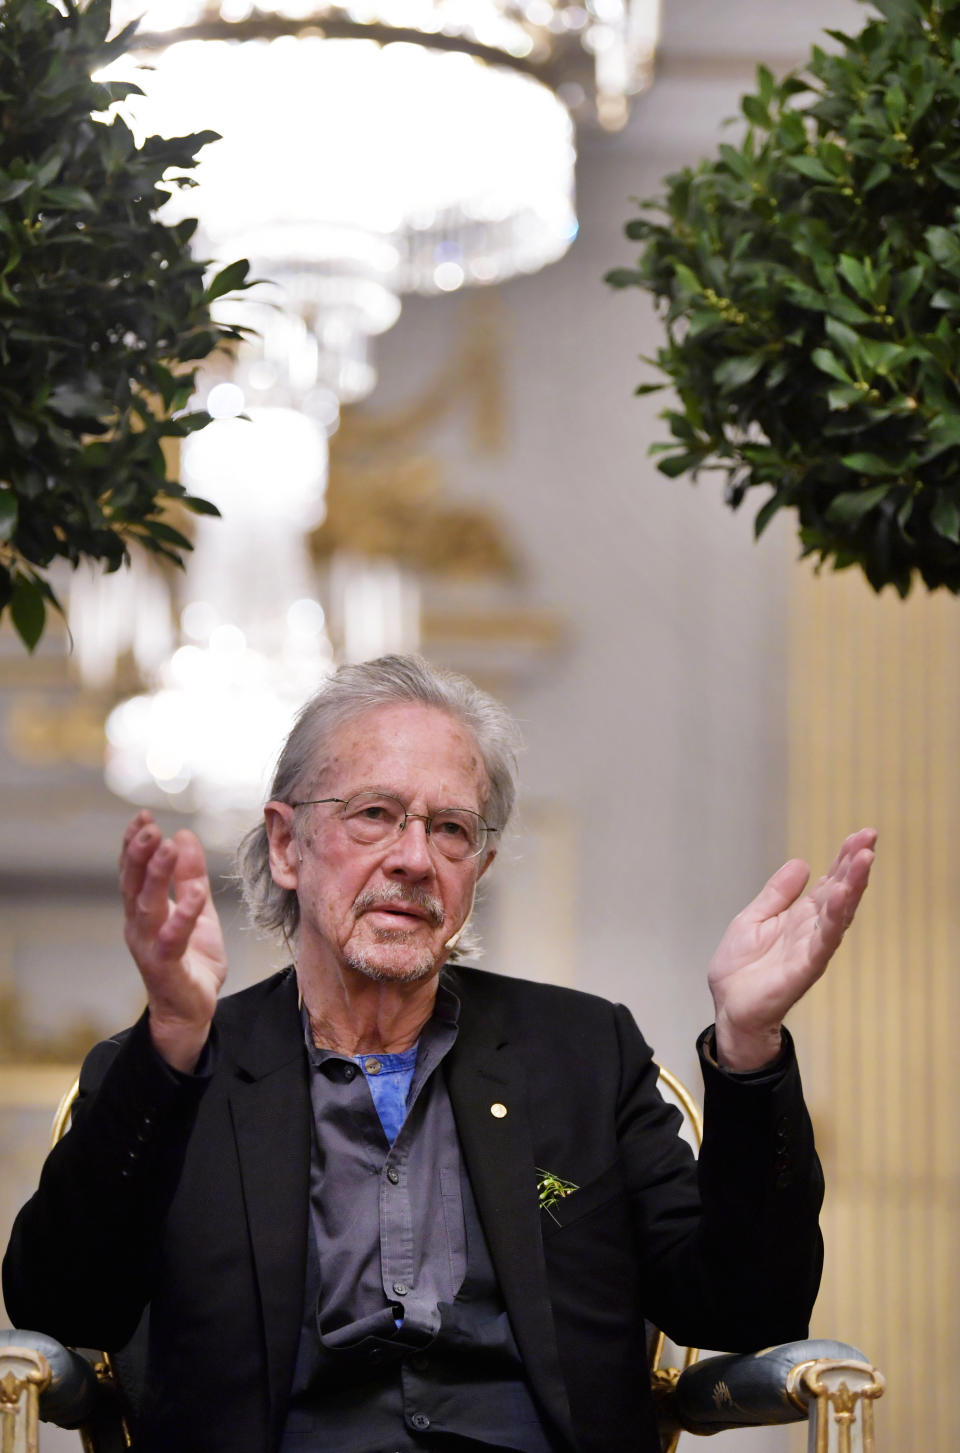 2019 Nobel Prize laureate in literature Peter Handke speaks at a press conference at the Swedish Academy in Stockholm, Sweden, Monday Dec. 6, 2019. (Anders Wiklund/TT via AP)